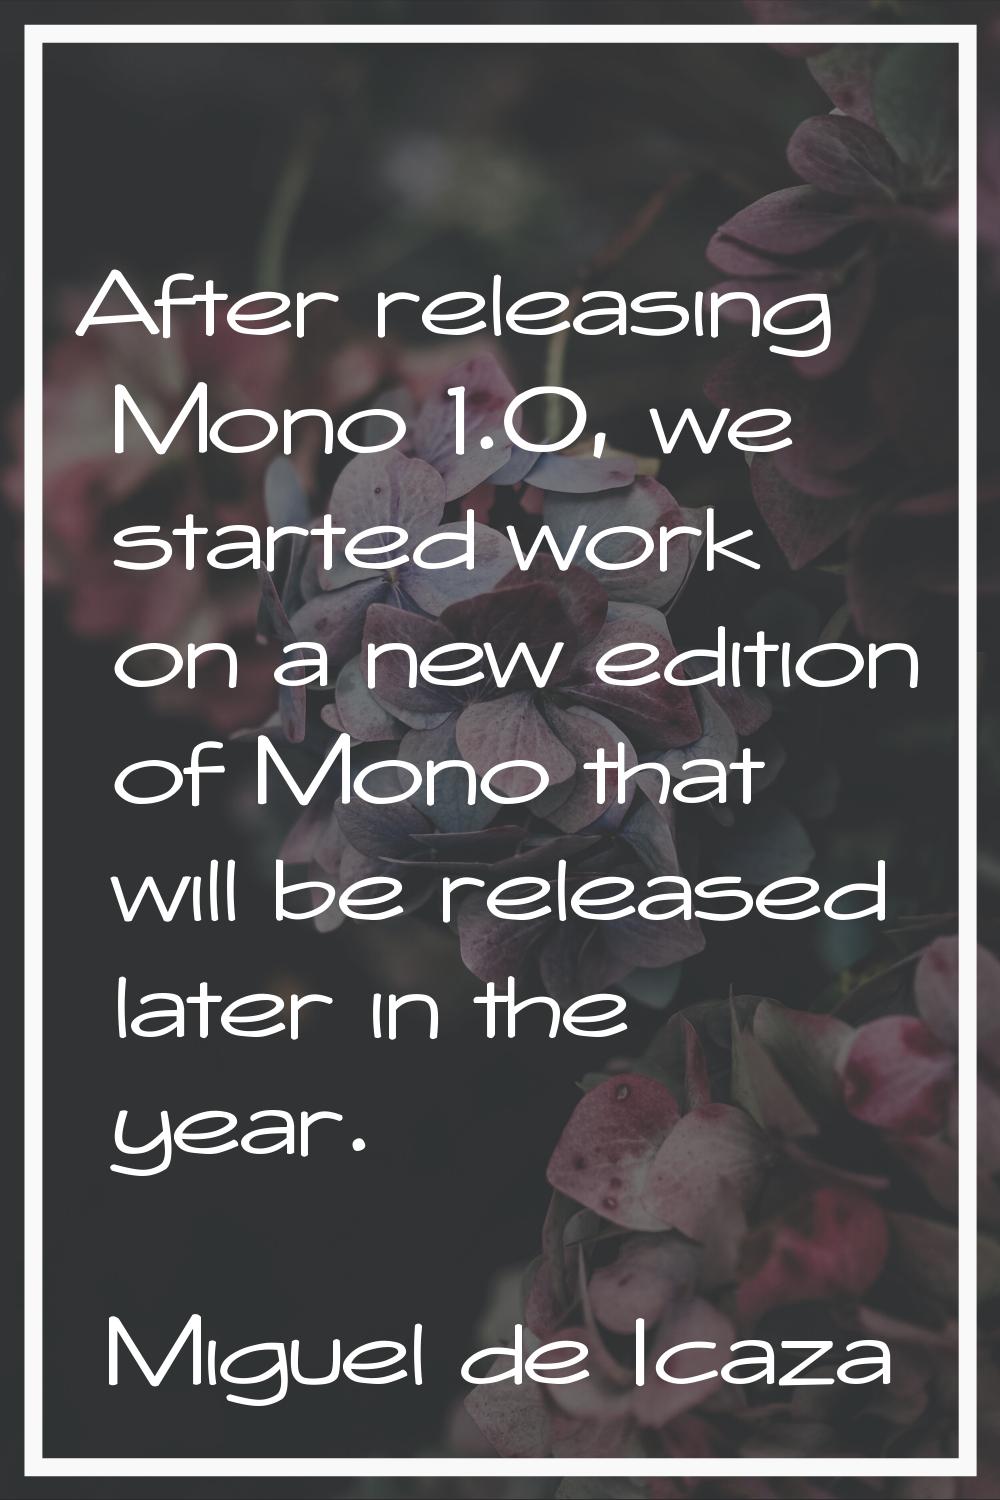 After releasing Mono 1.0, we started work on a new edition of Mono that will be released later in t